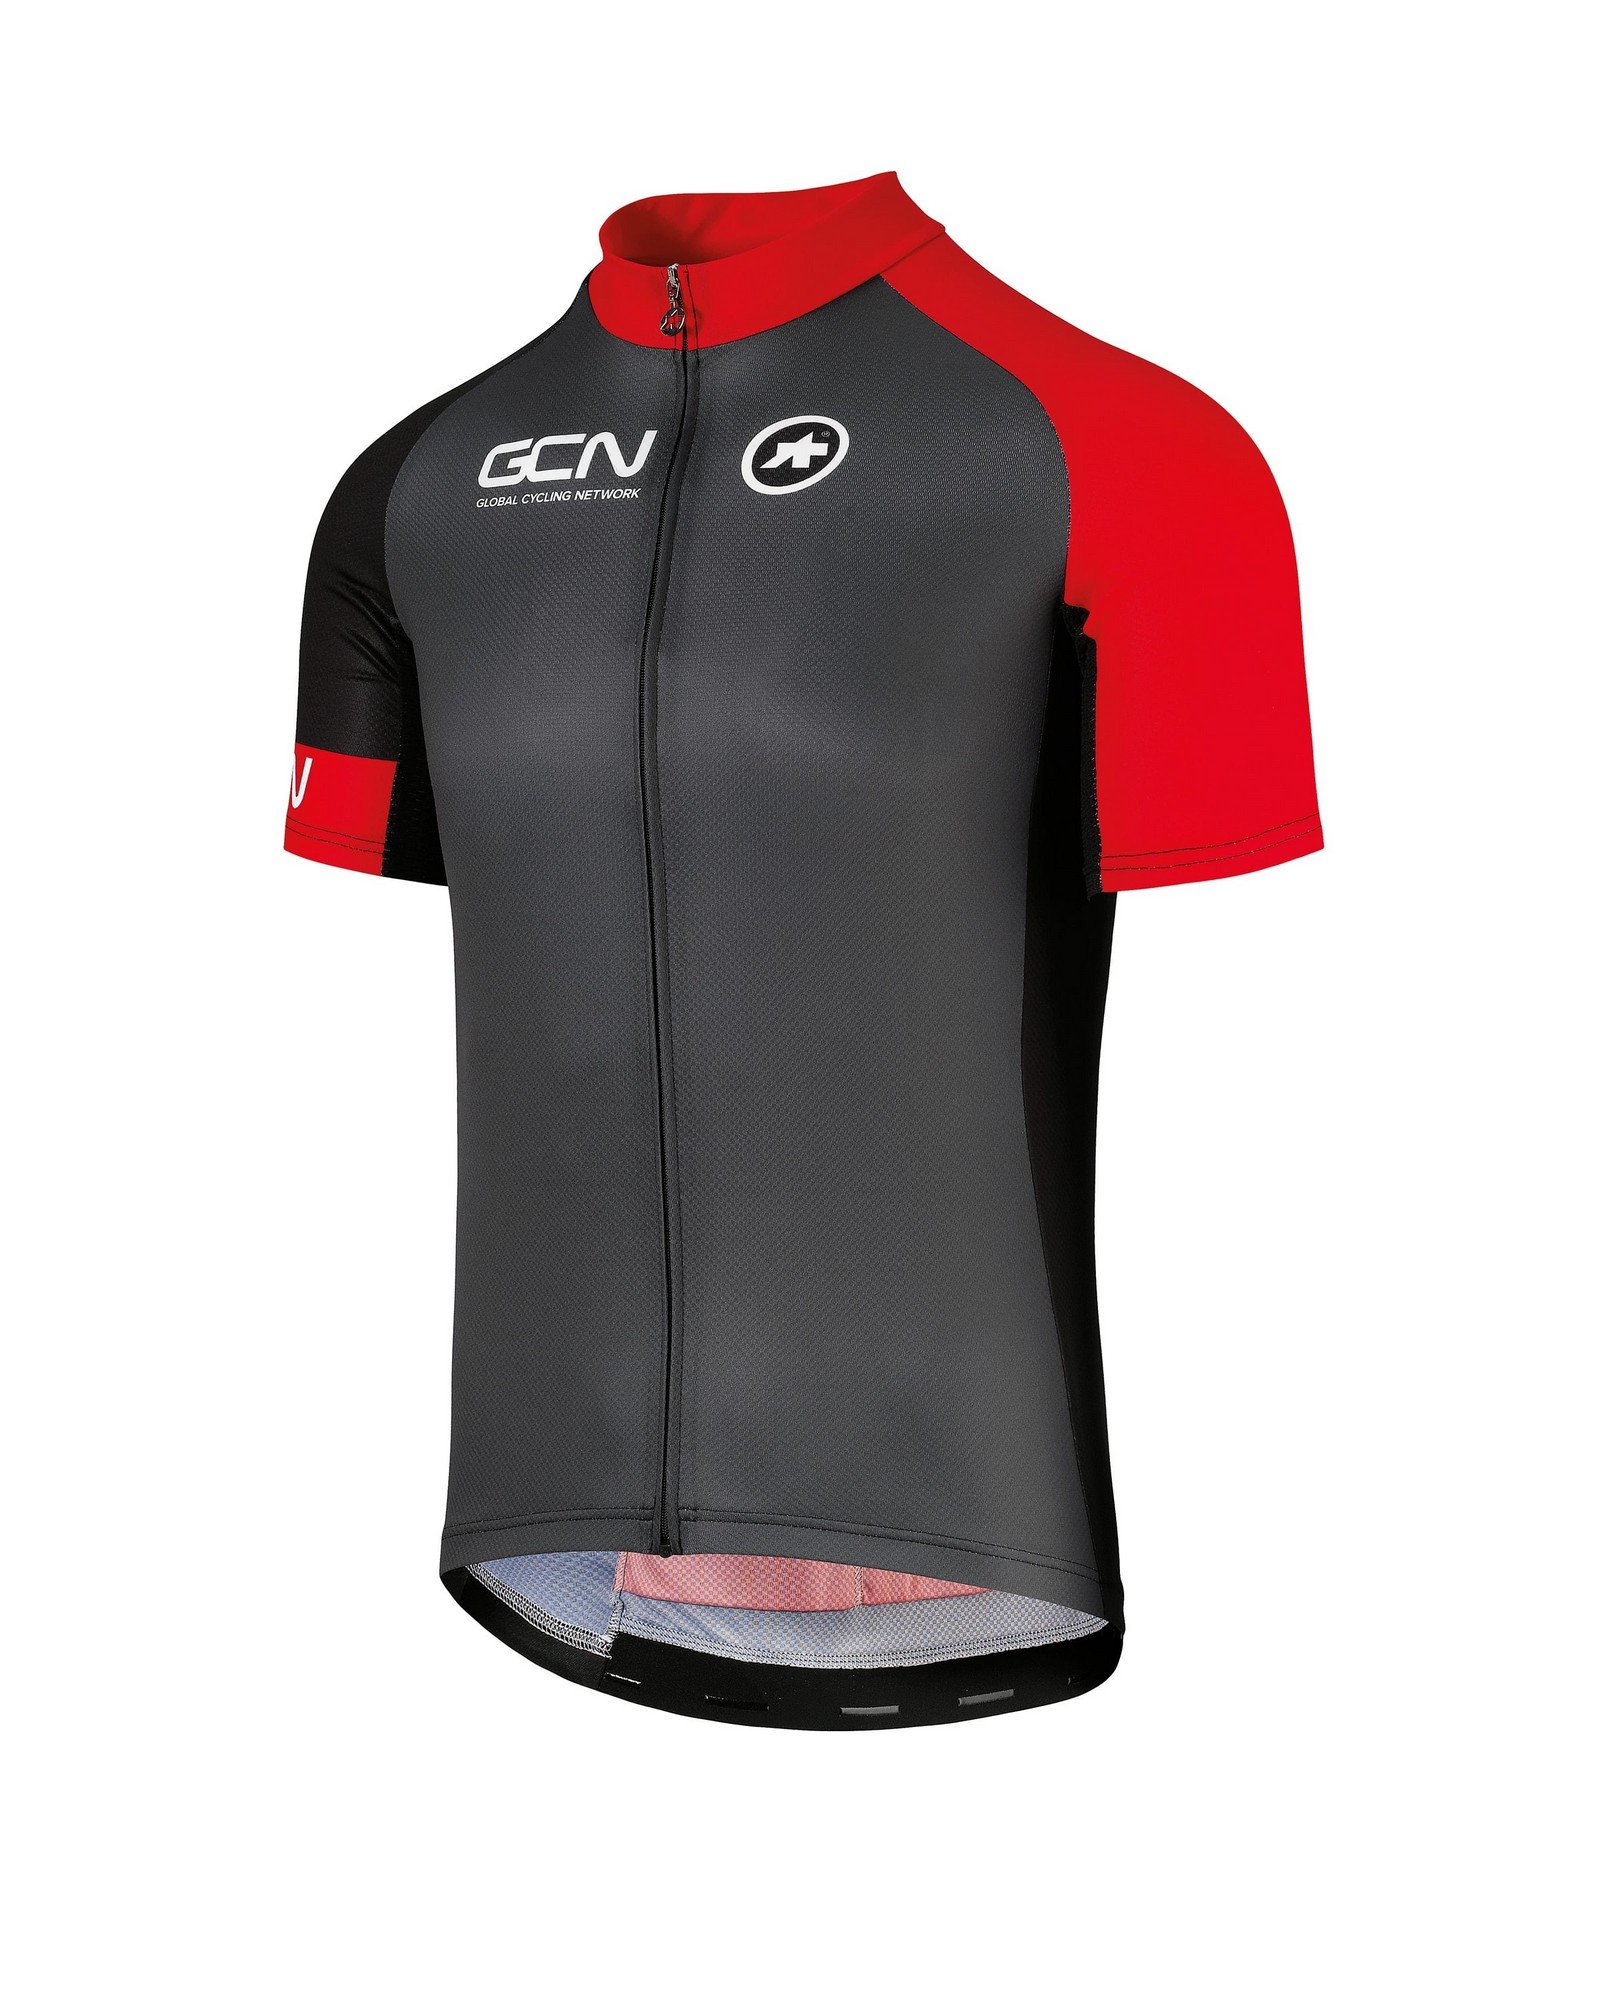 gcn cycling clothing